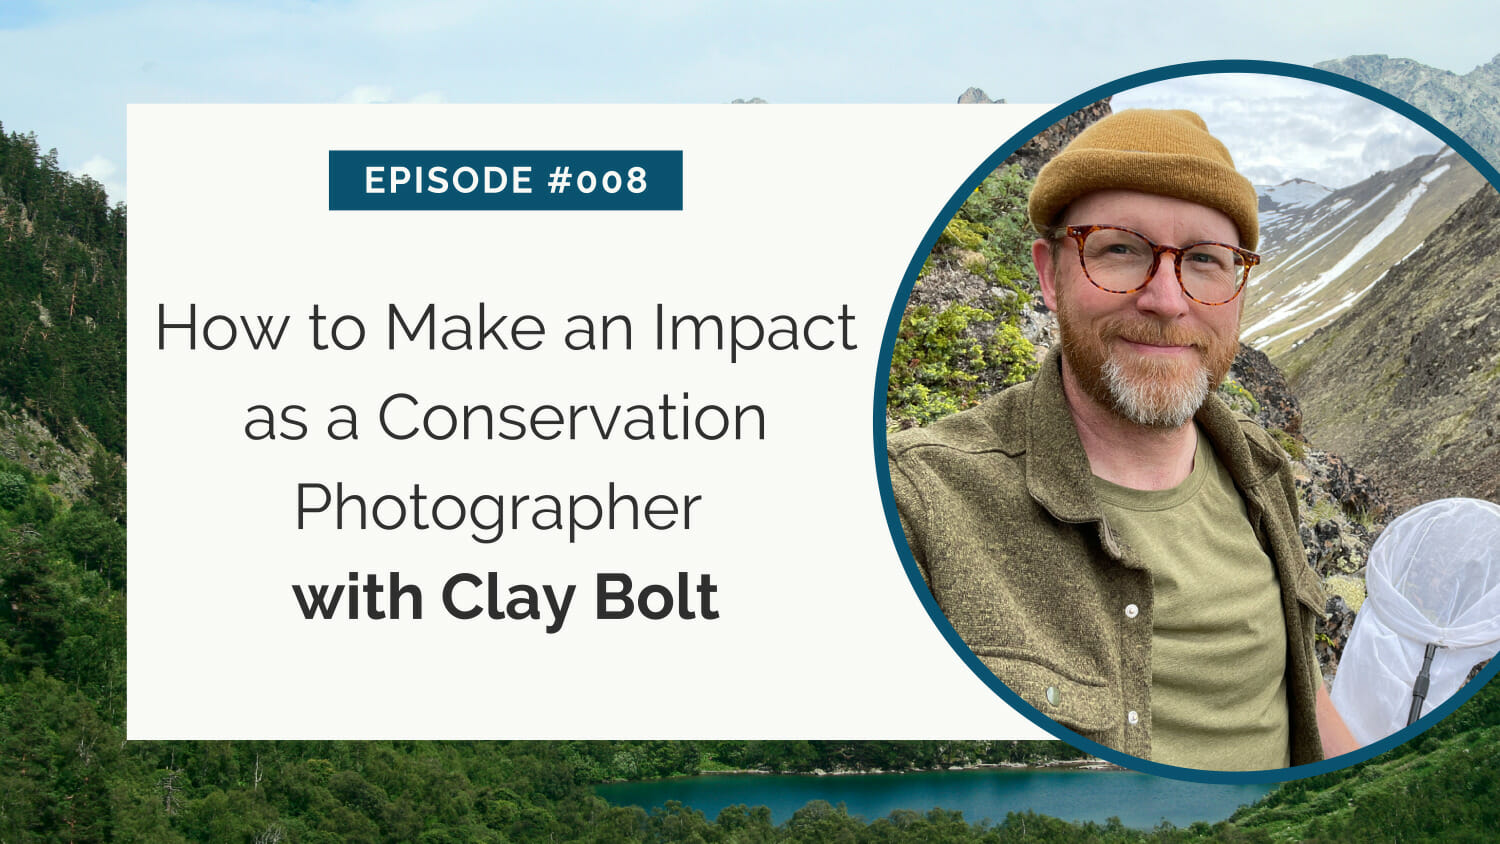 Conservation photographer clay bolt featured in episode #008 discussing how to make an impact through photography.